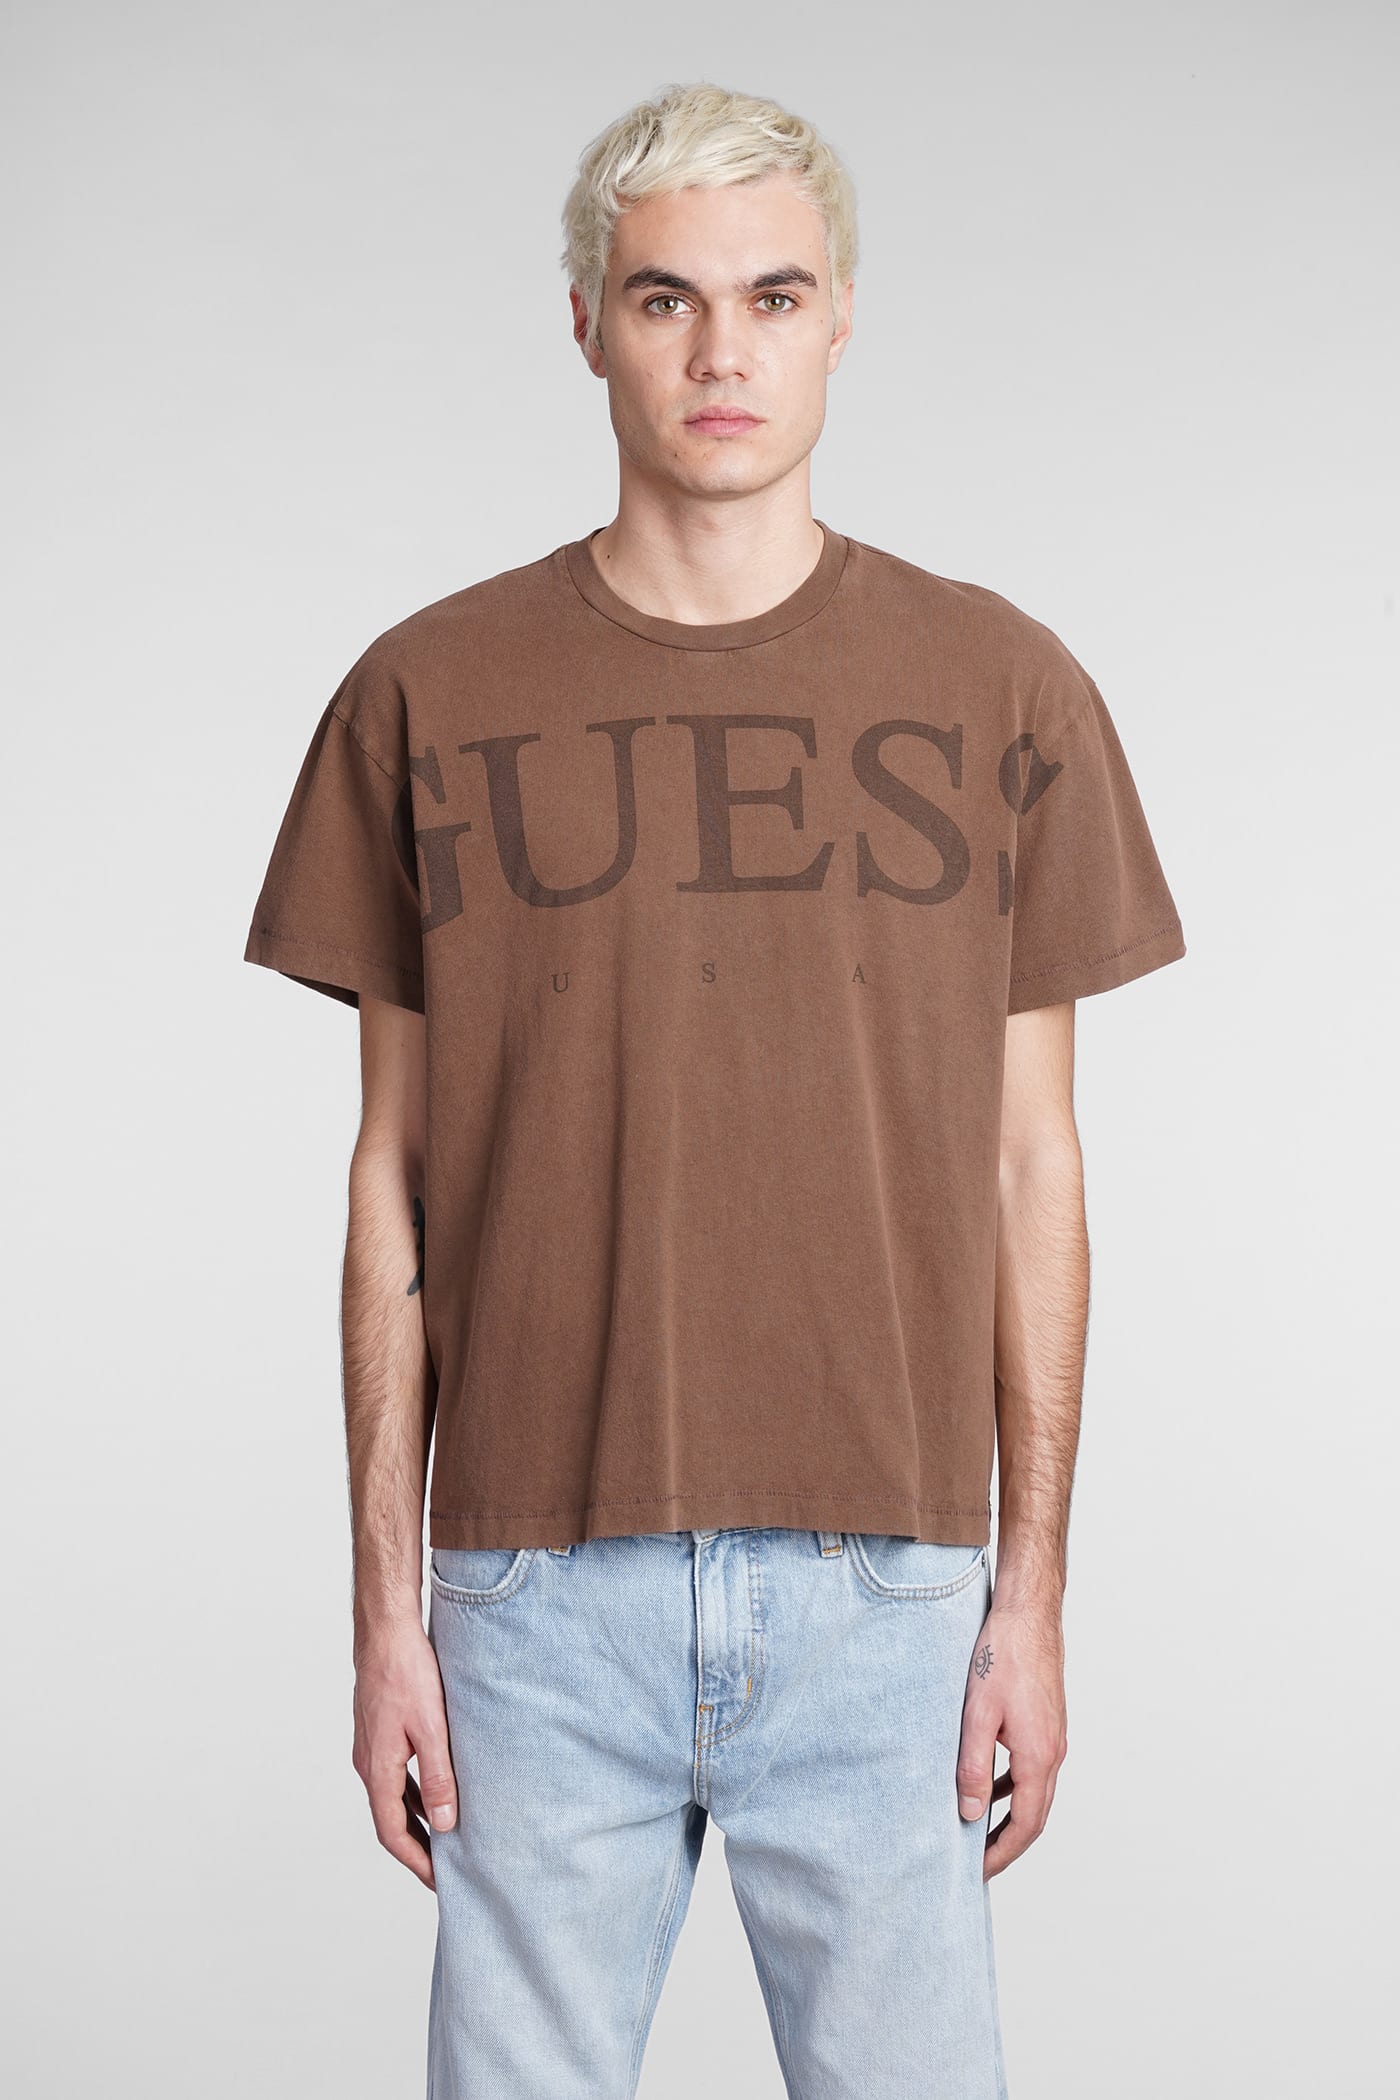 Guess T-shirt In Brown Cotton